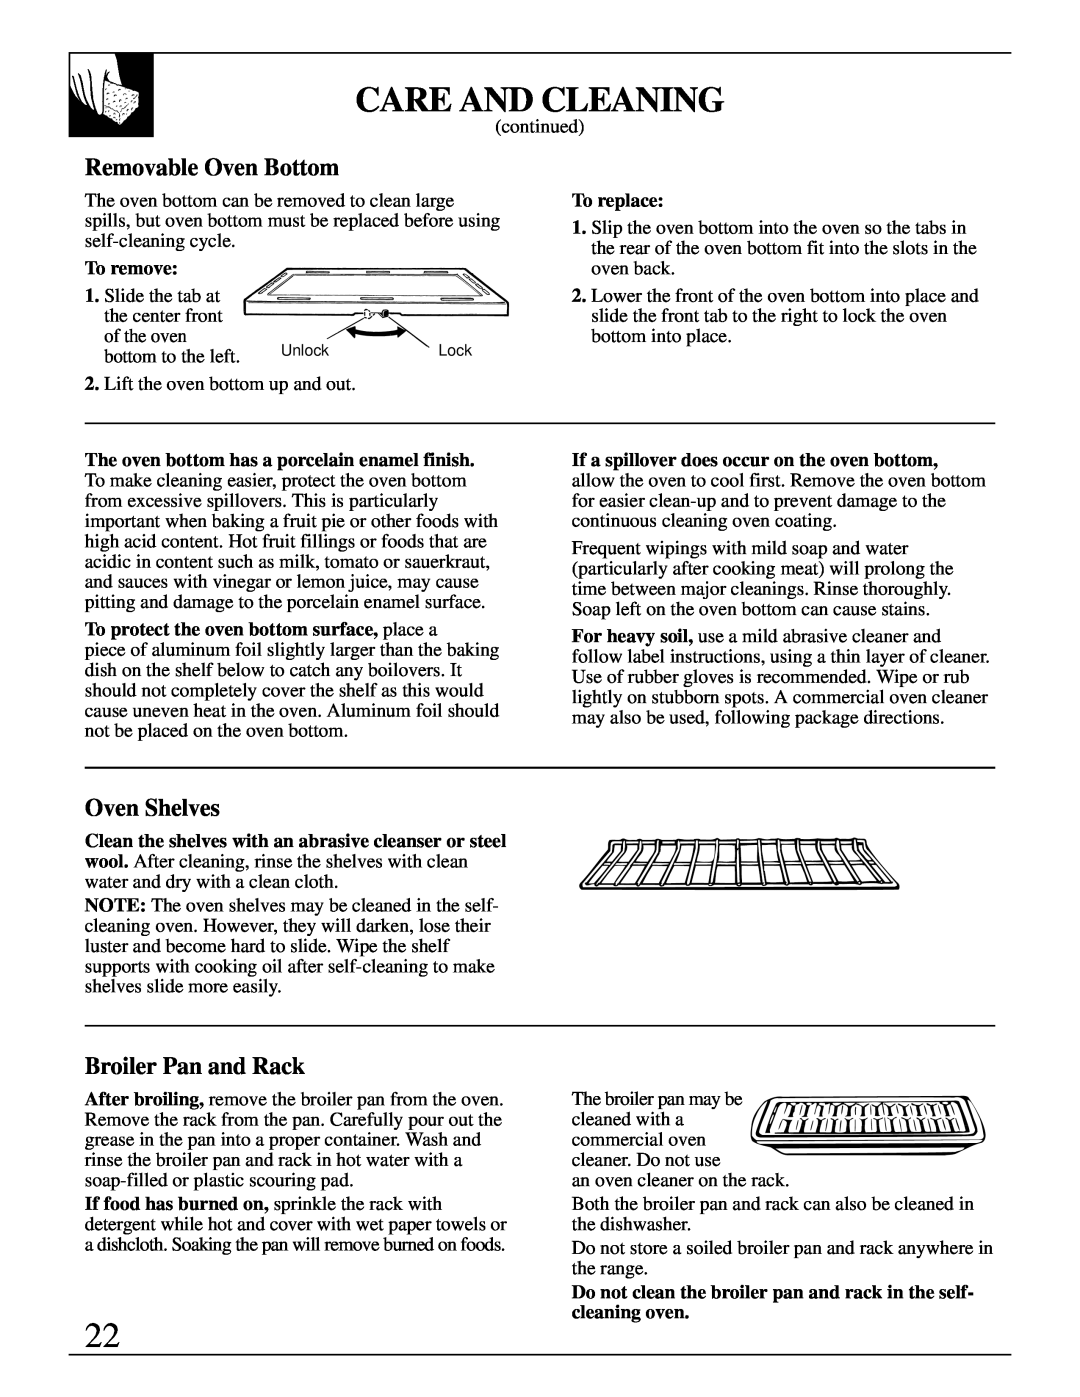 GE JGBP19, 164D2966P079 warranty Removable Oven Bottom, Broiler Pan and Rack, Care And Cleaning, Oven Shelves 